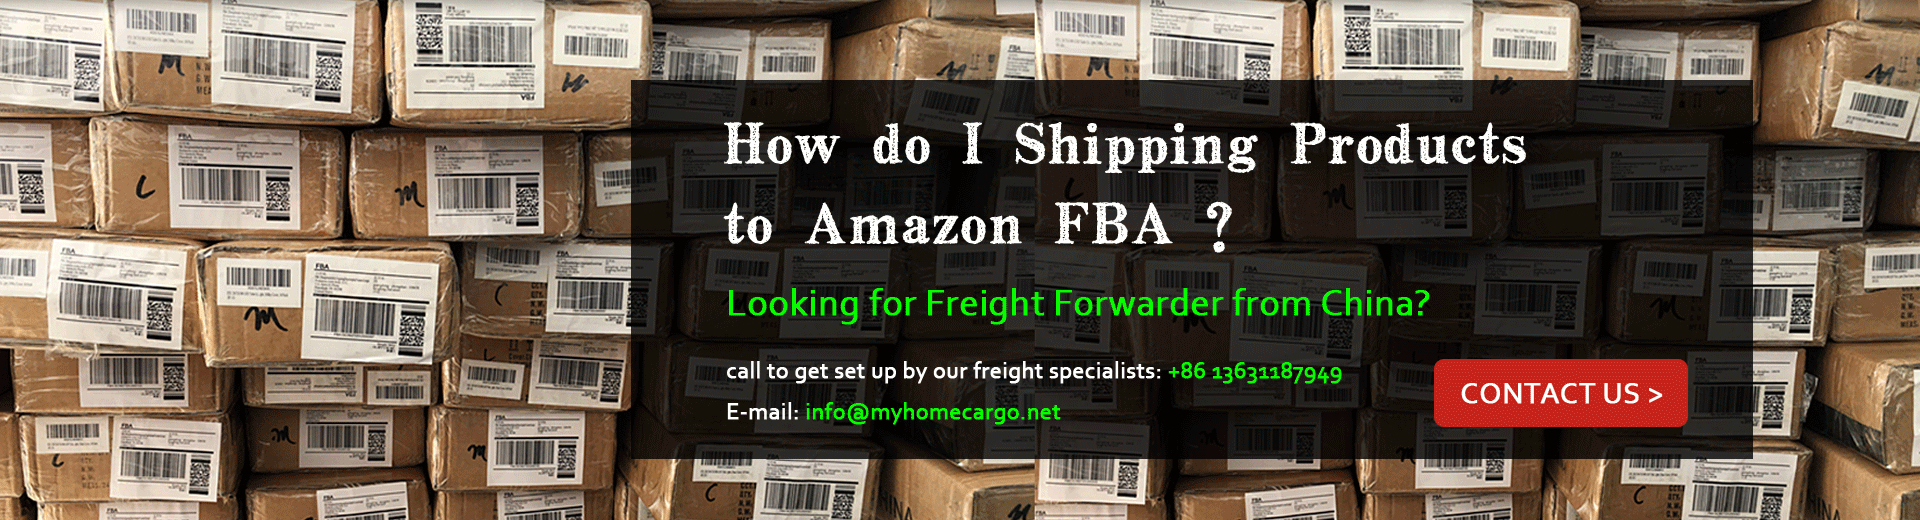 fba shipping to amazon from china